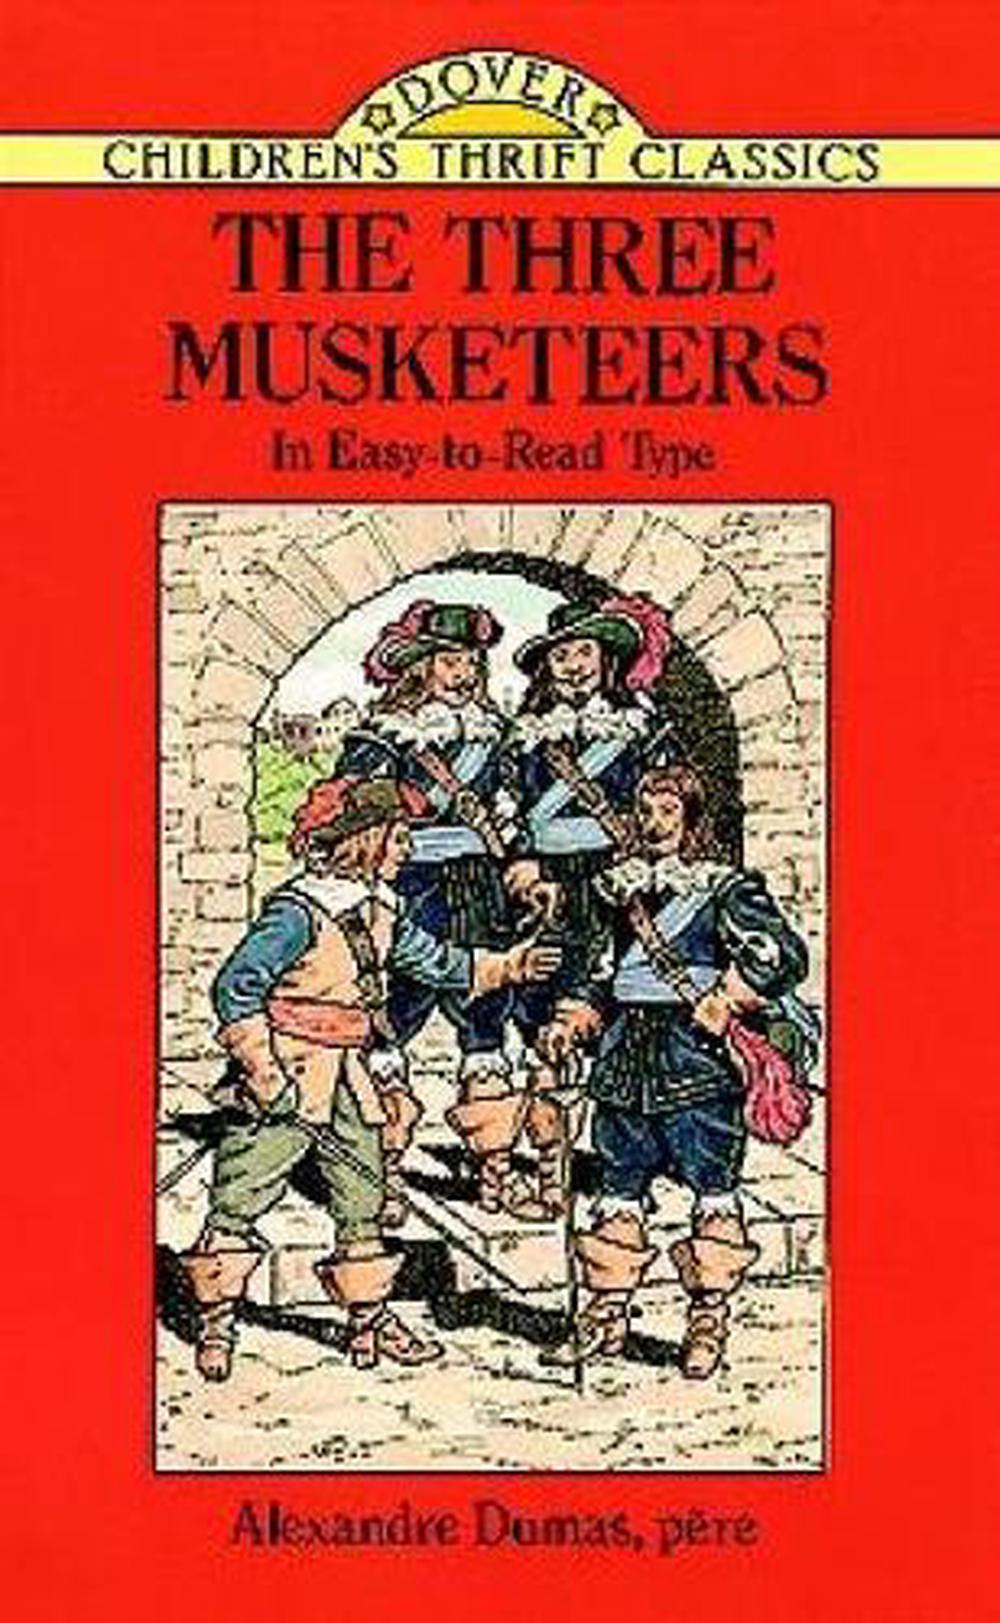 in alexandre dumas book the three musketeers